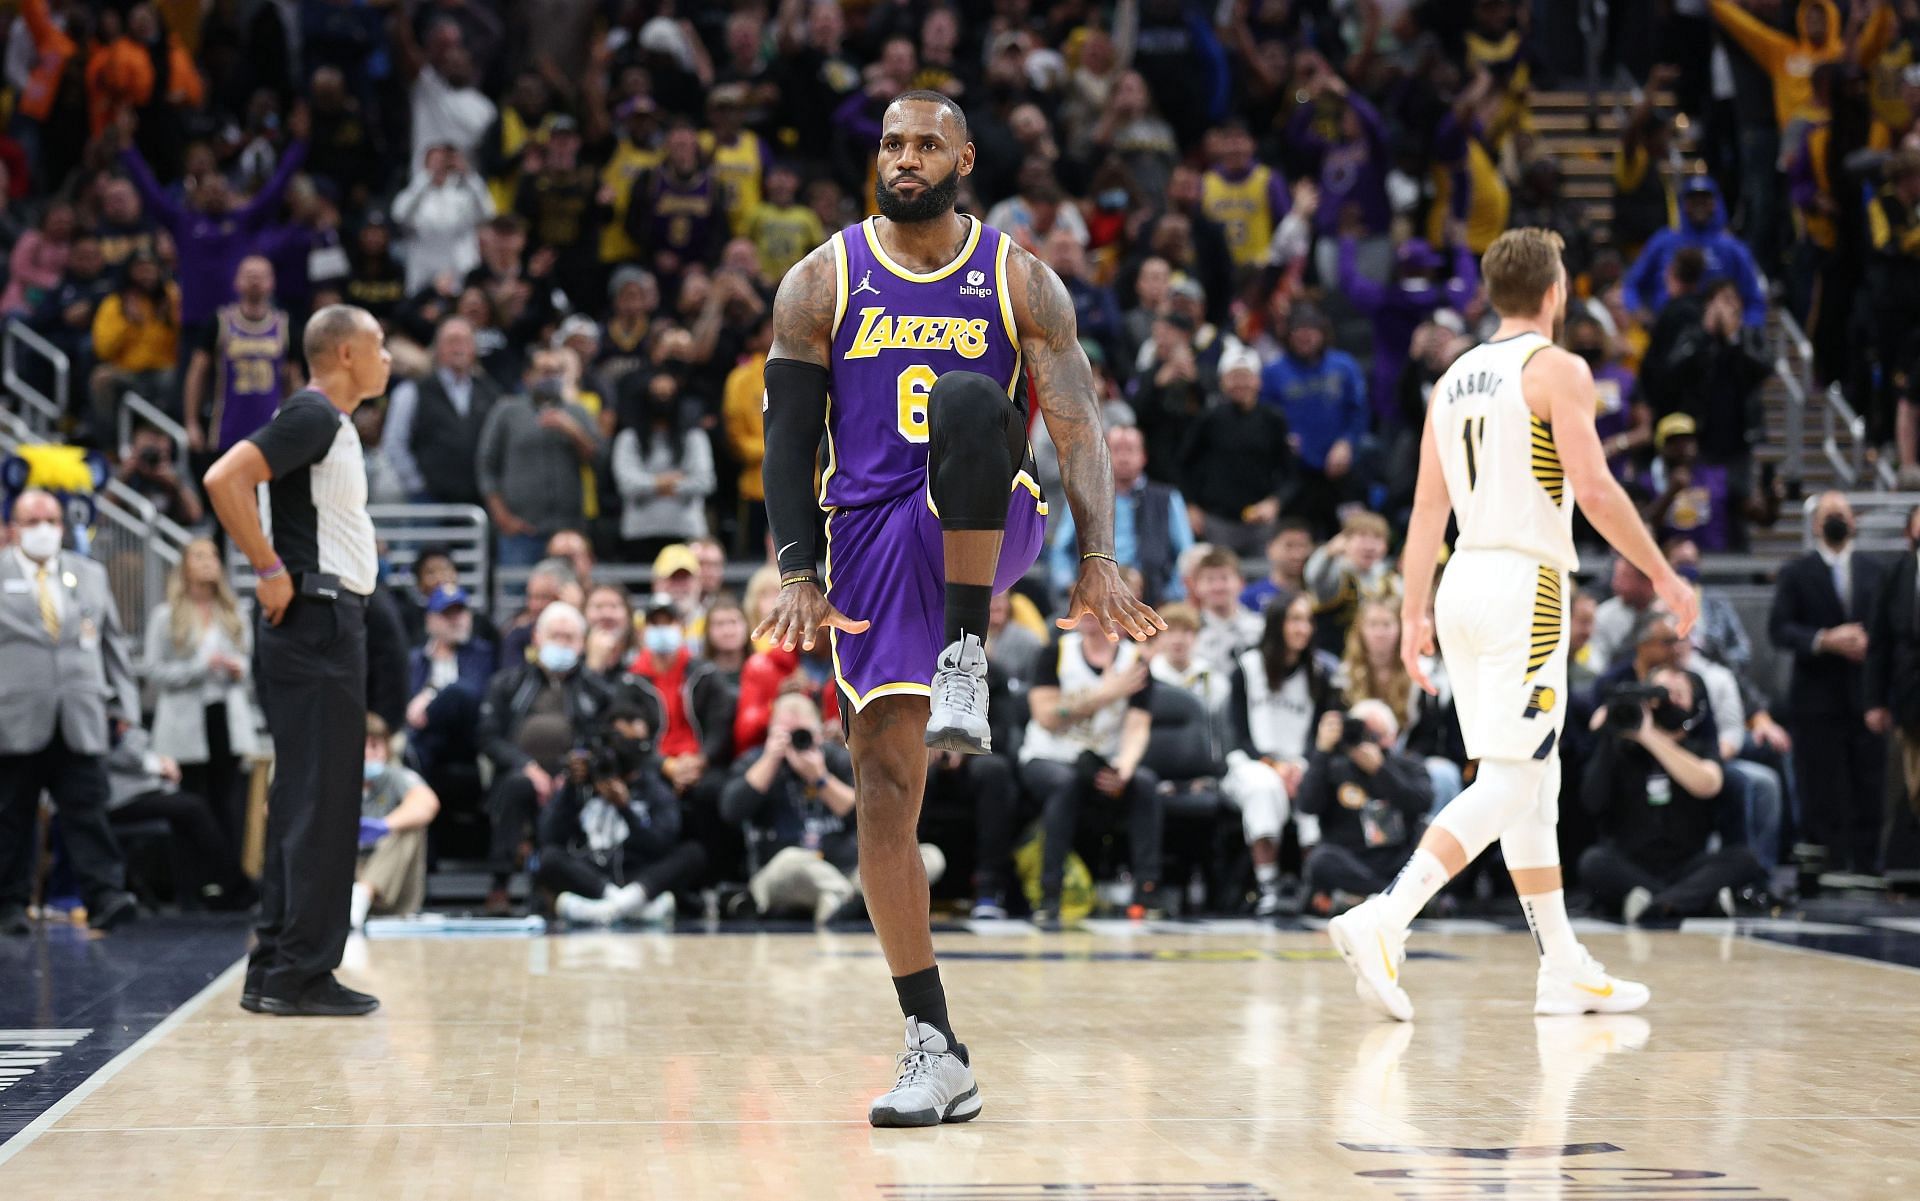 LeBron James does his iconic celebration at the LA Lakers v Indiana Pacers game